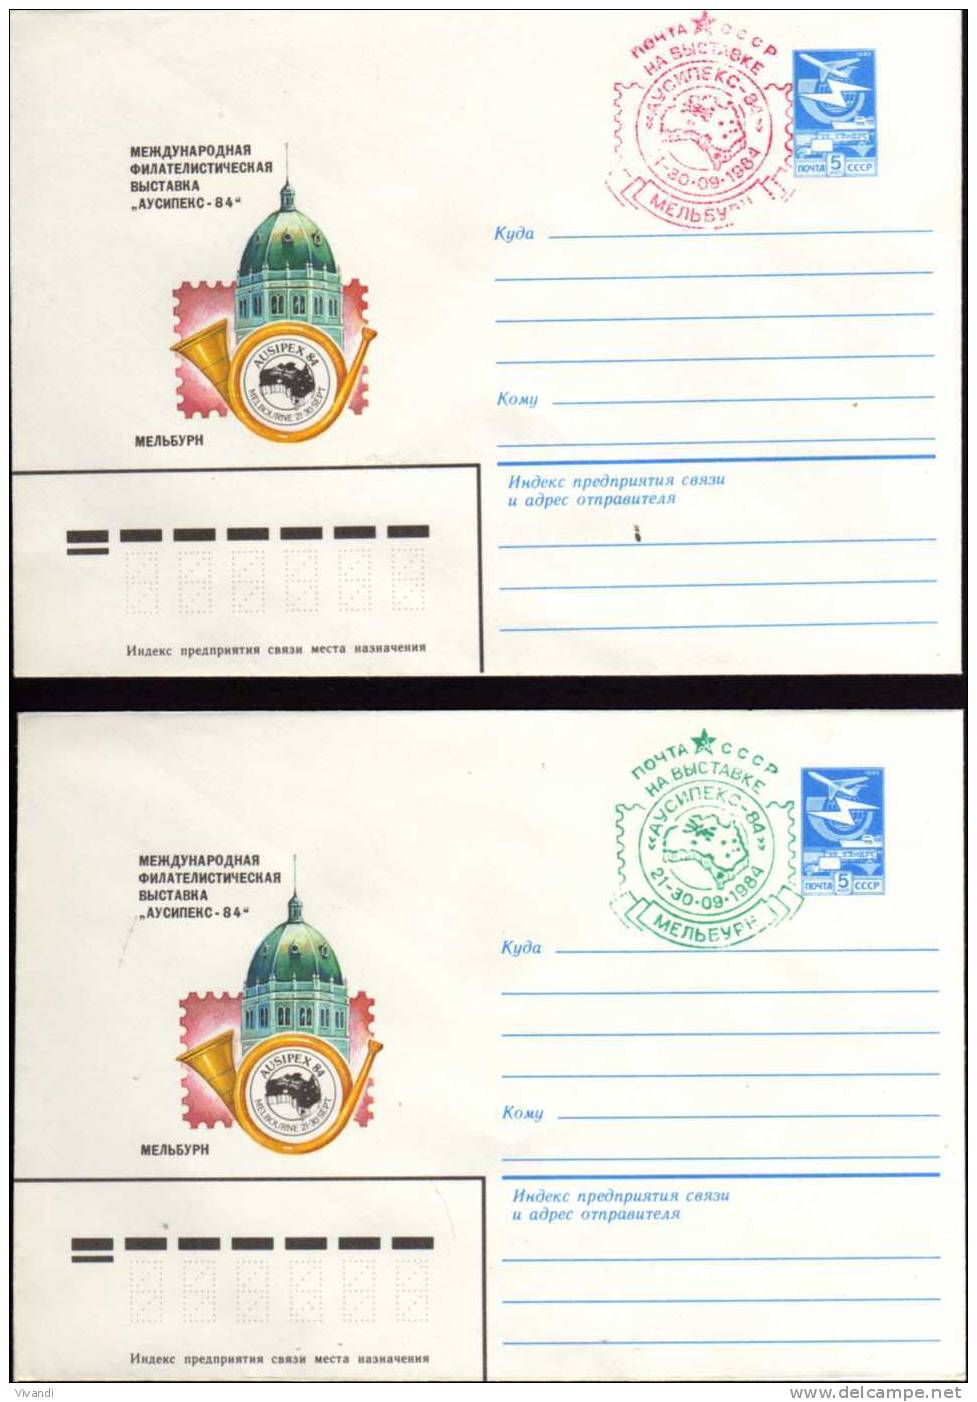 USSR - 1984 - "Ausipex 84" Exhibition Cancels On 2 Unaddressed Covers - Covers & Documents